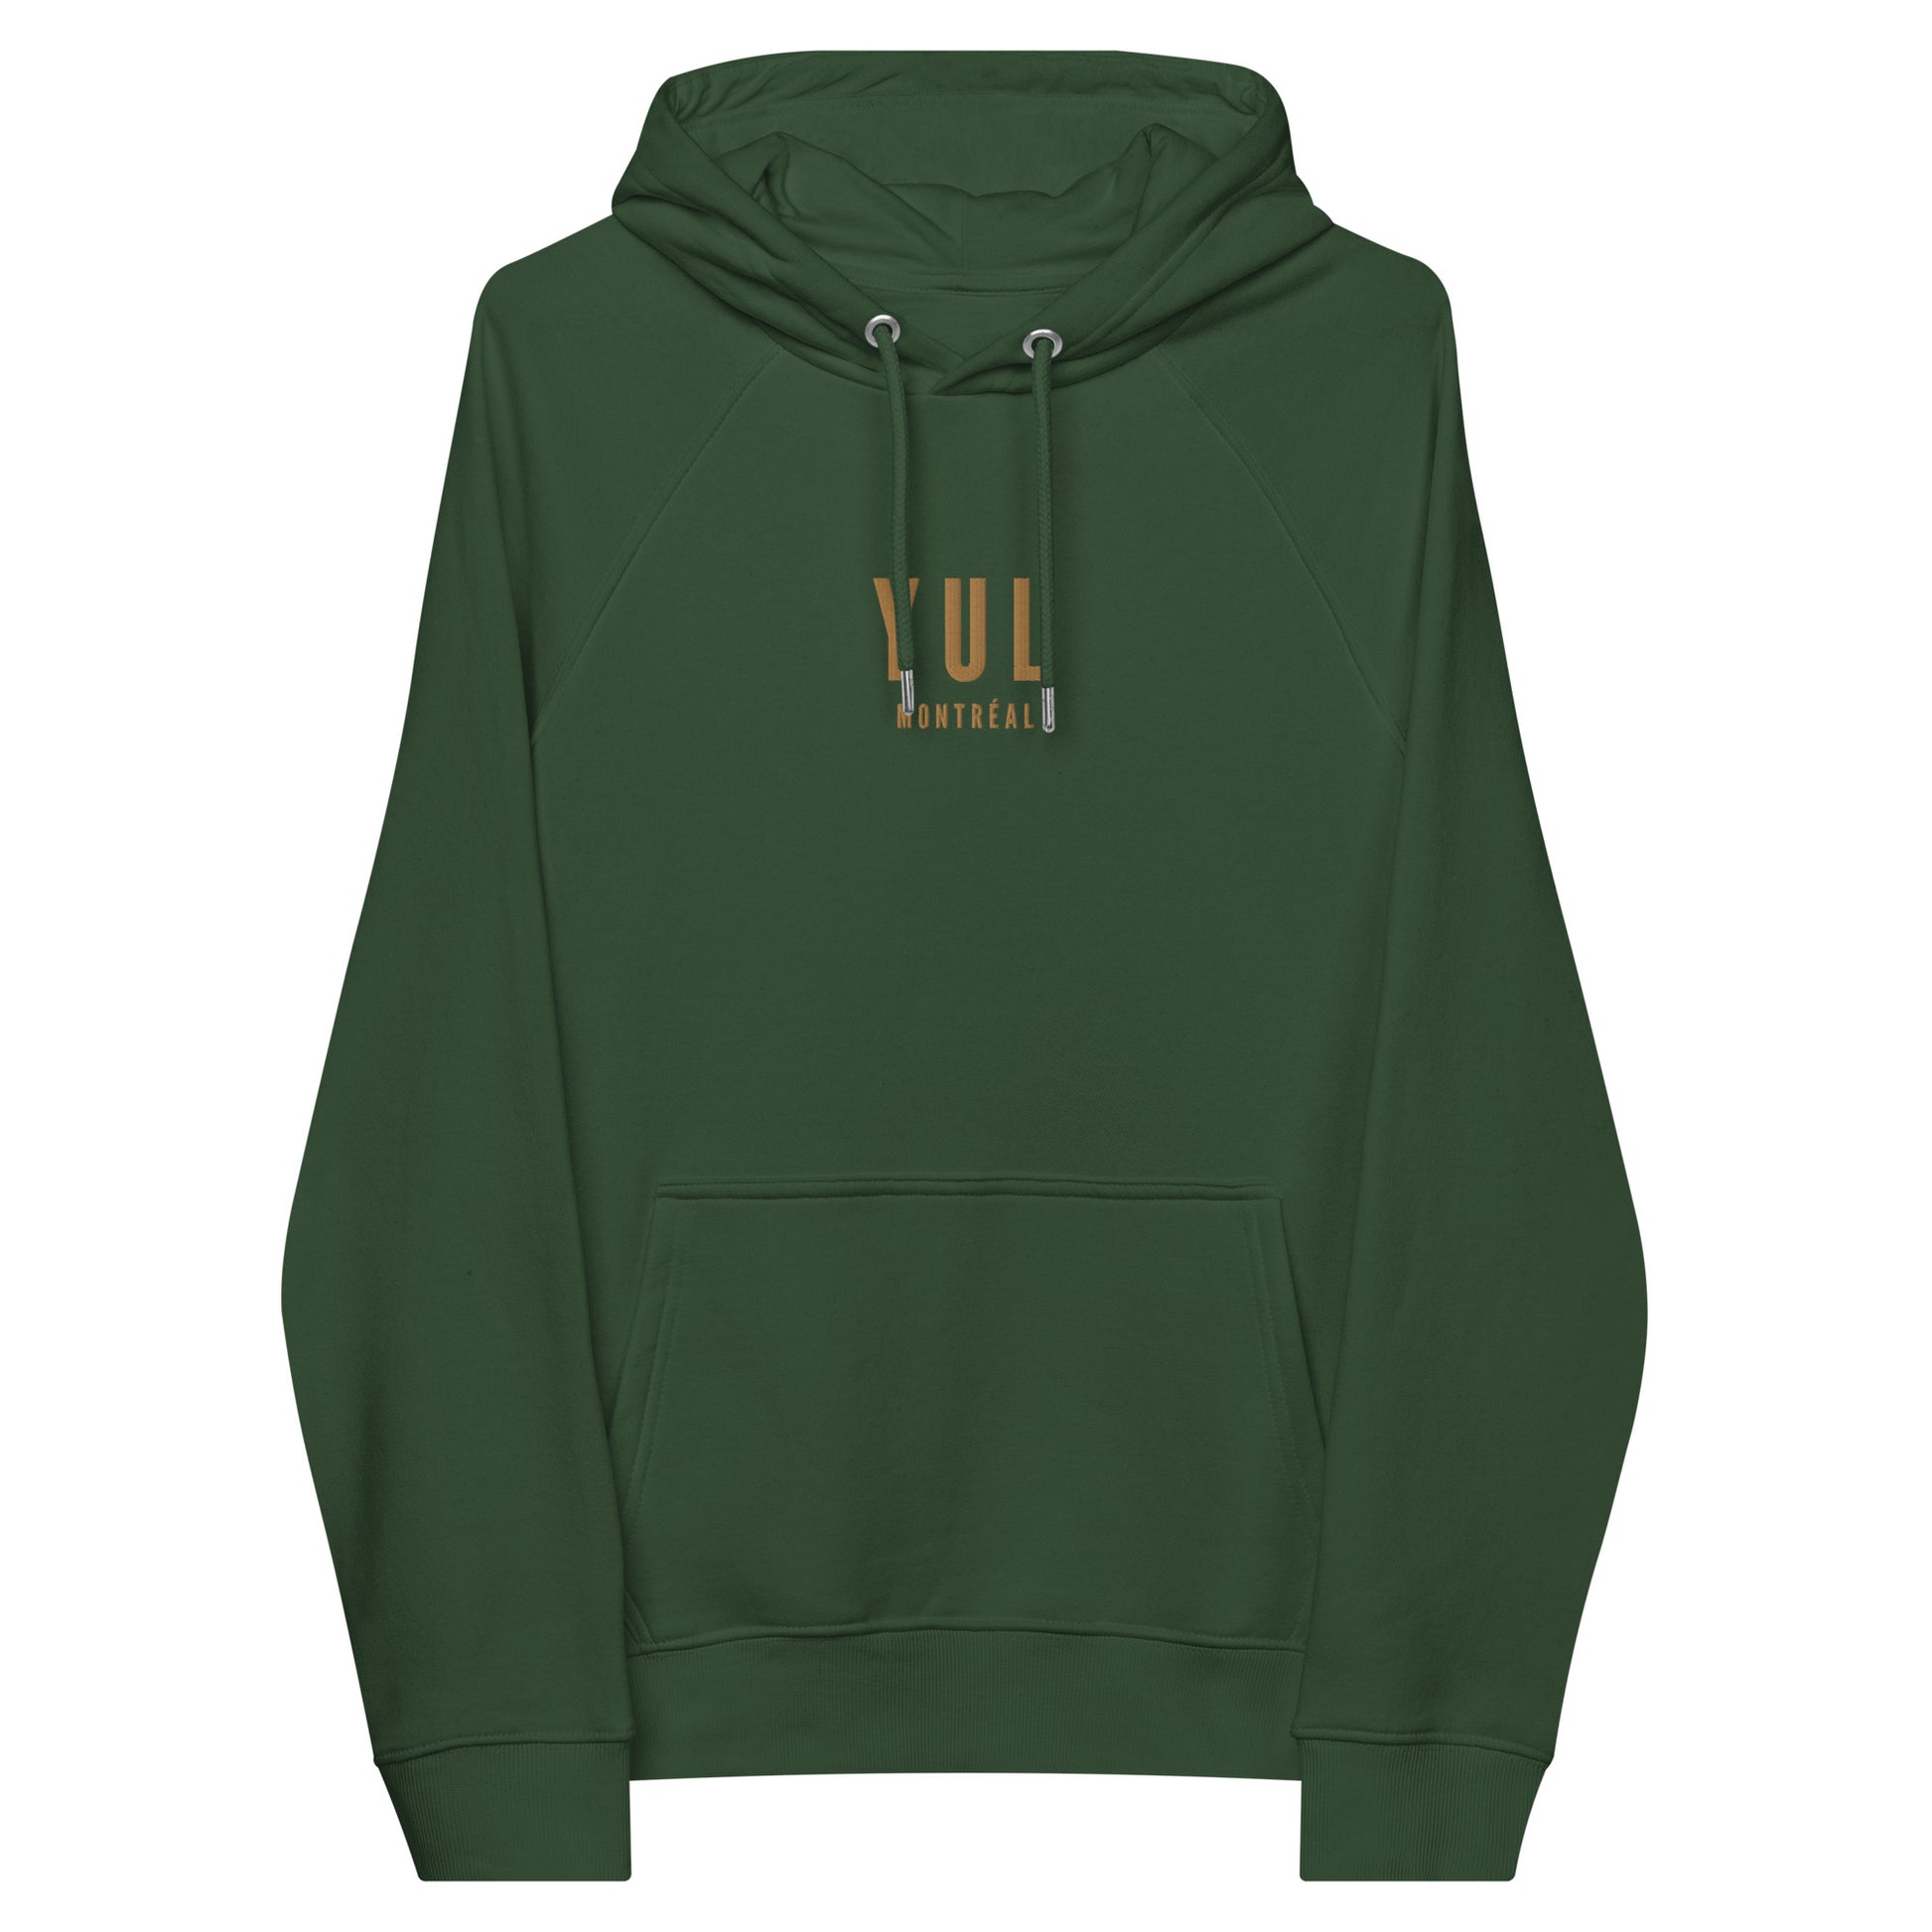 City Organic Hoodie - Old Gold • YUL Montreal • YHM Designs - Image 08